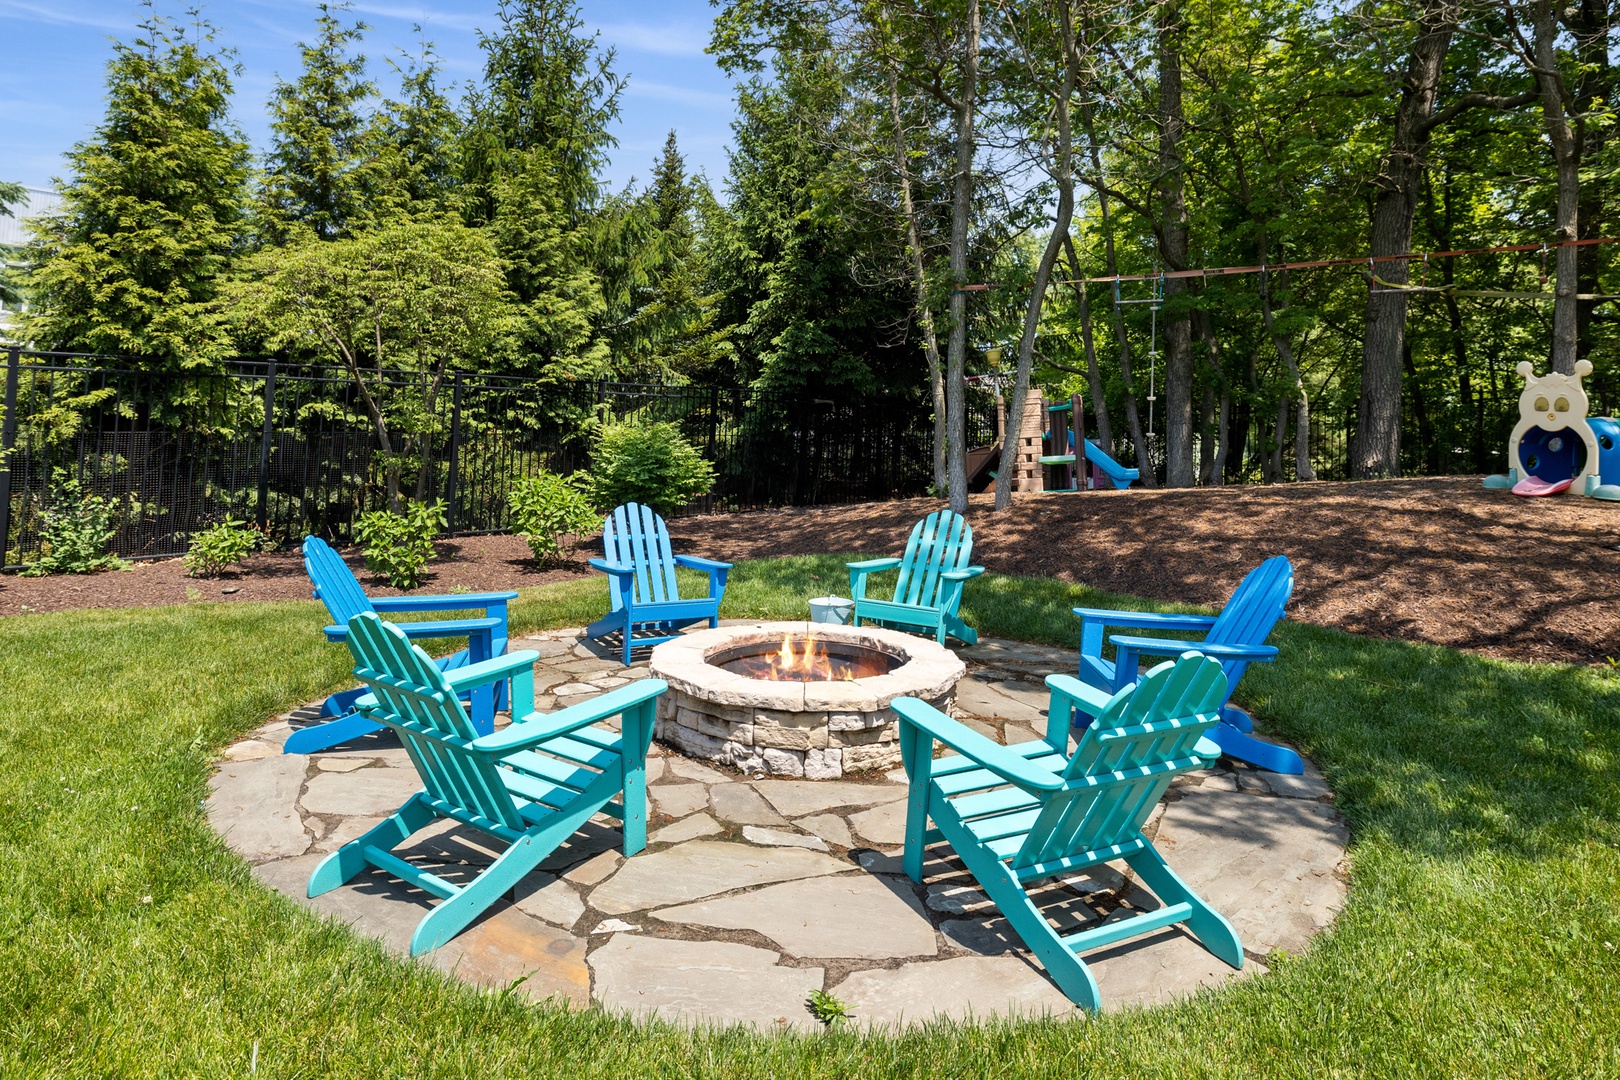 Get cozy and gather around the fire pit with some marshmallows or just to chat.